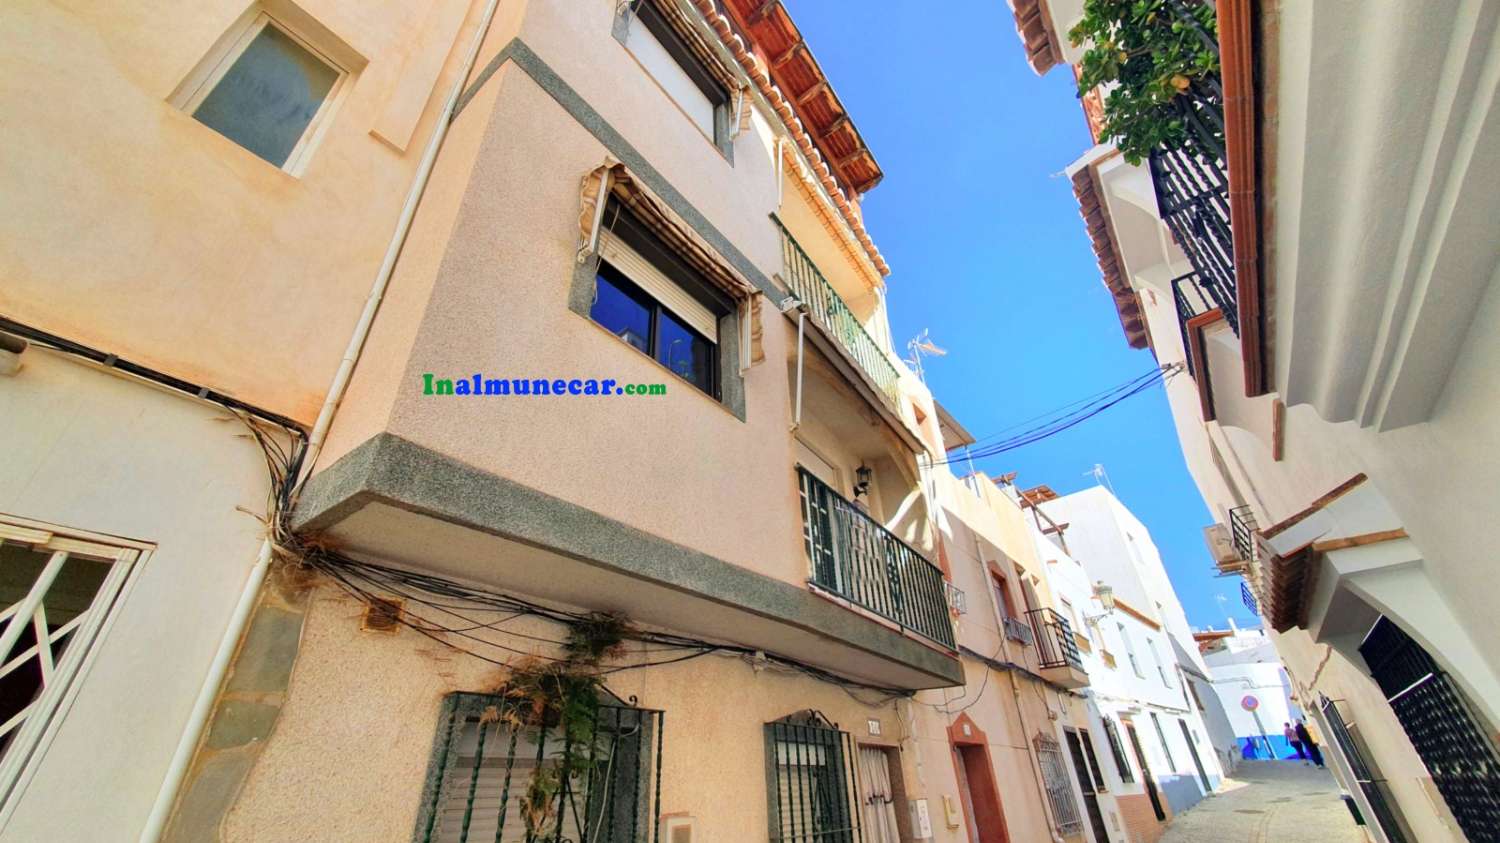 House for sale in the old town in Almuñecar